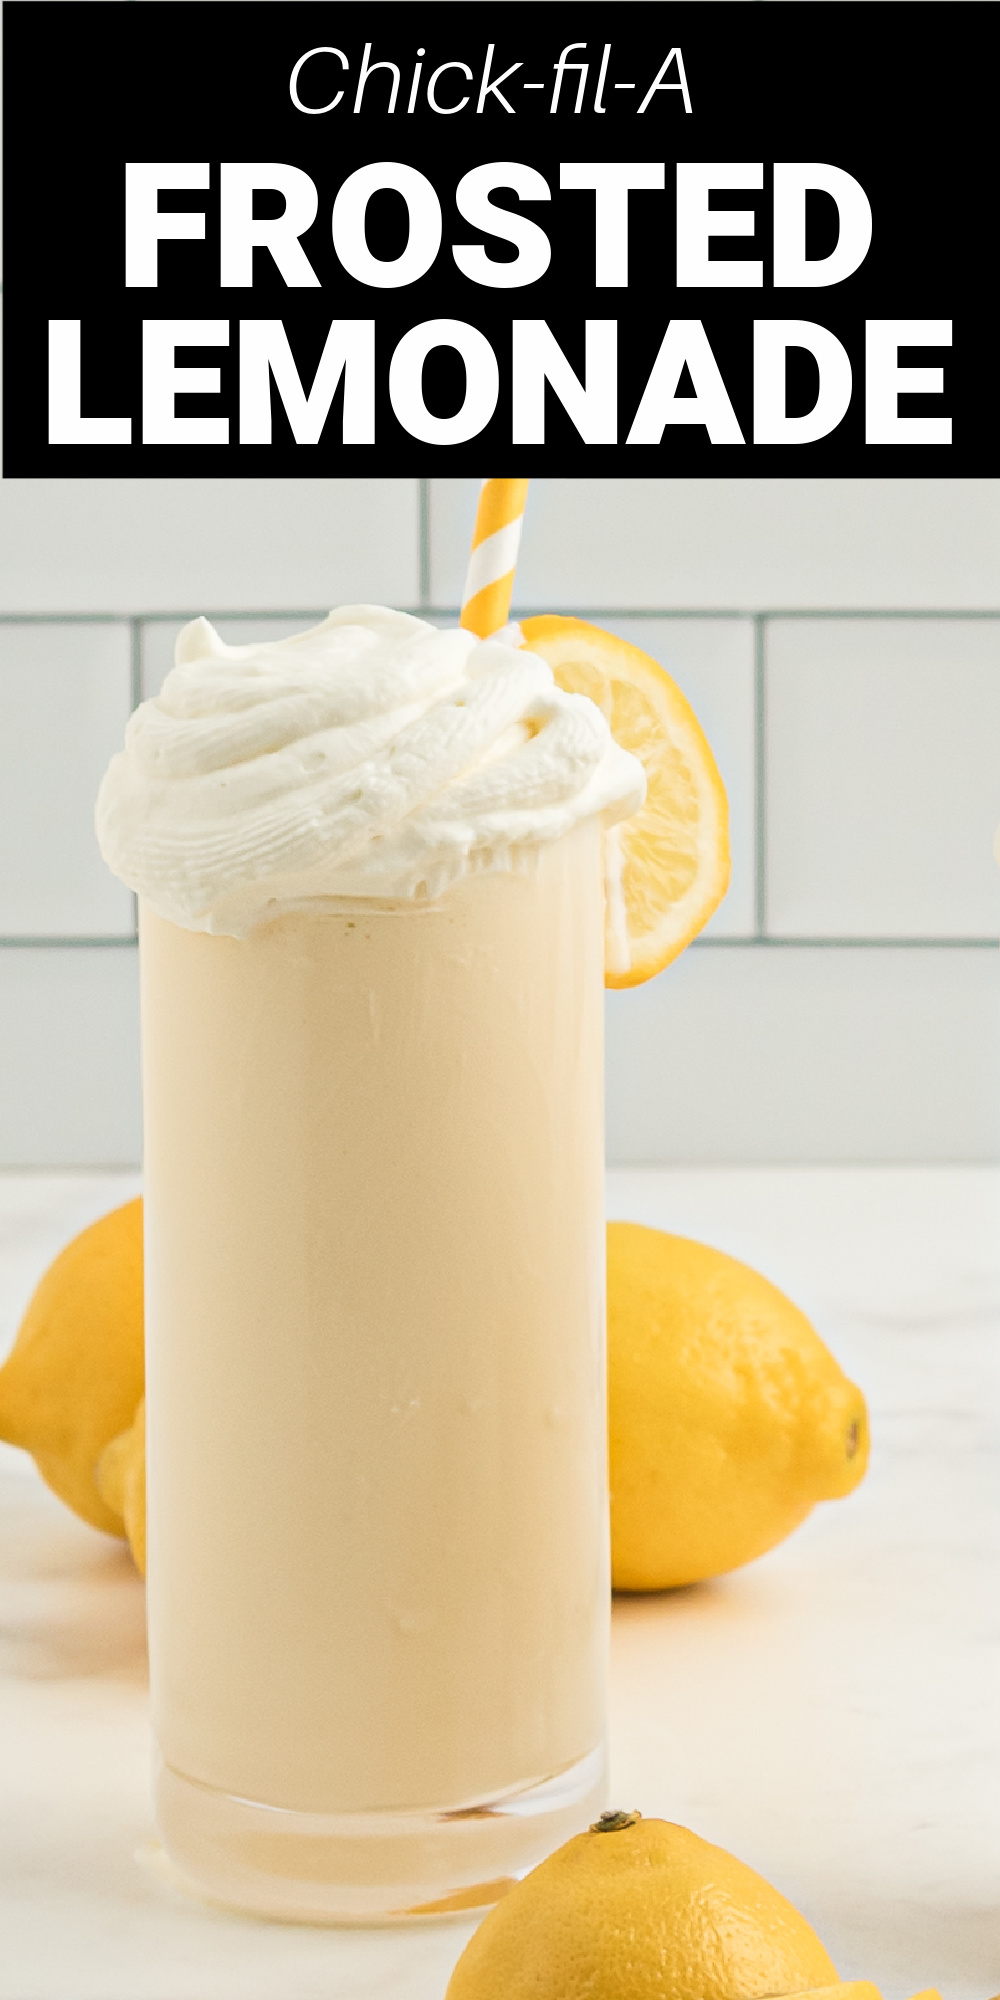 This Copycat Chick-fil-a Frosted Lemonade is made with just 2 simple ingredients that's a perfect creamy lemonade on a hot summer day.